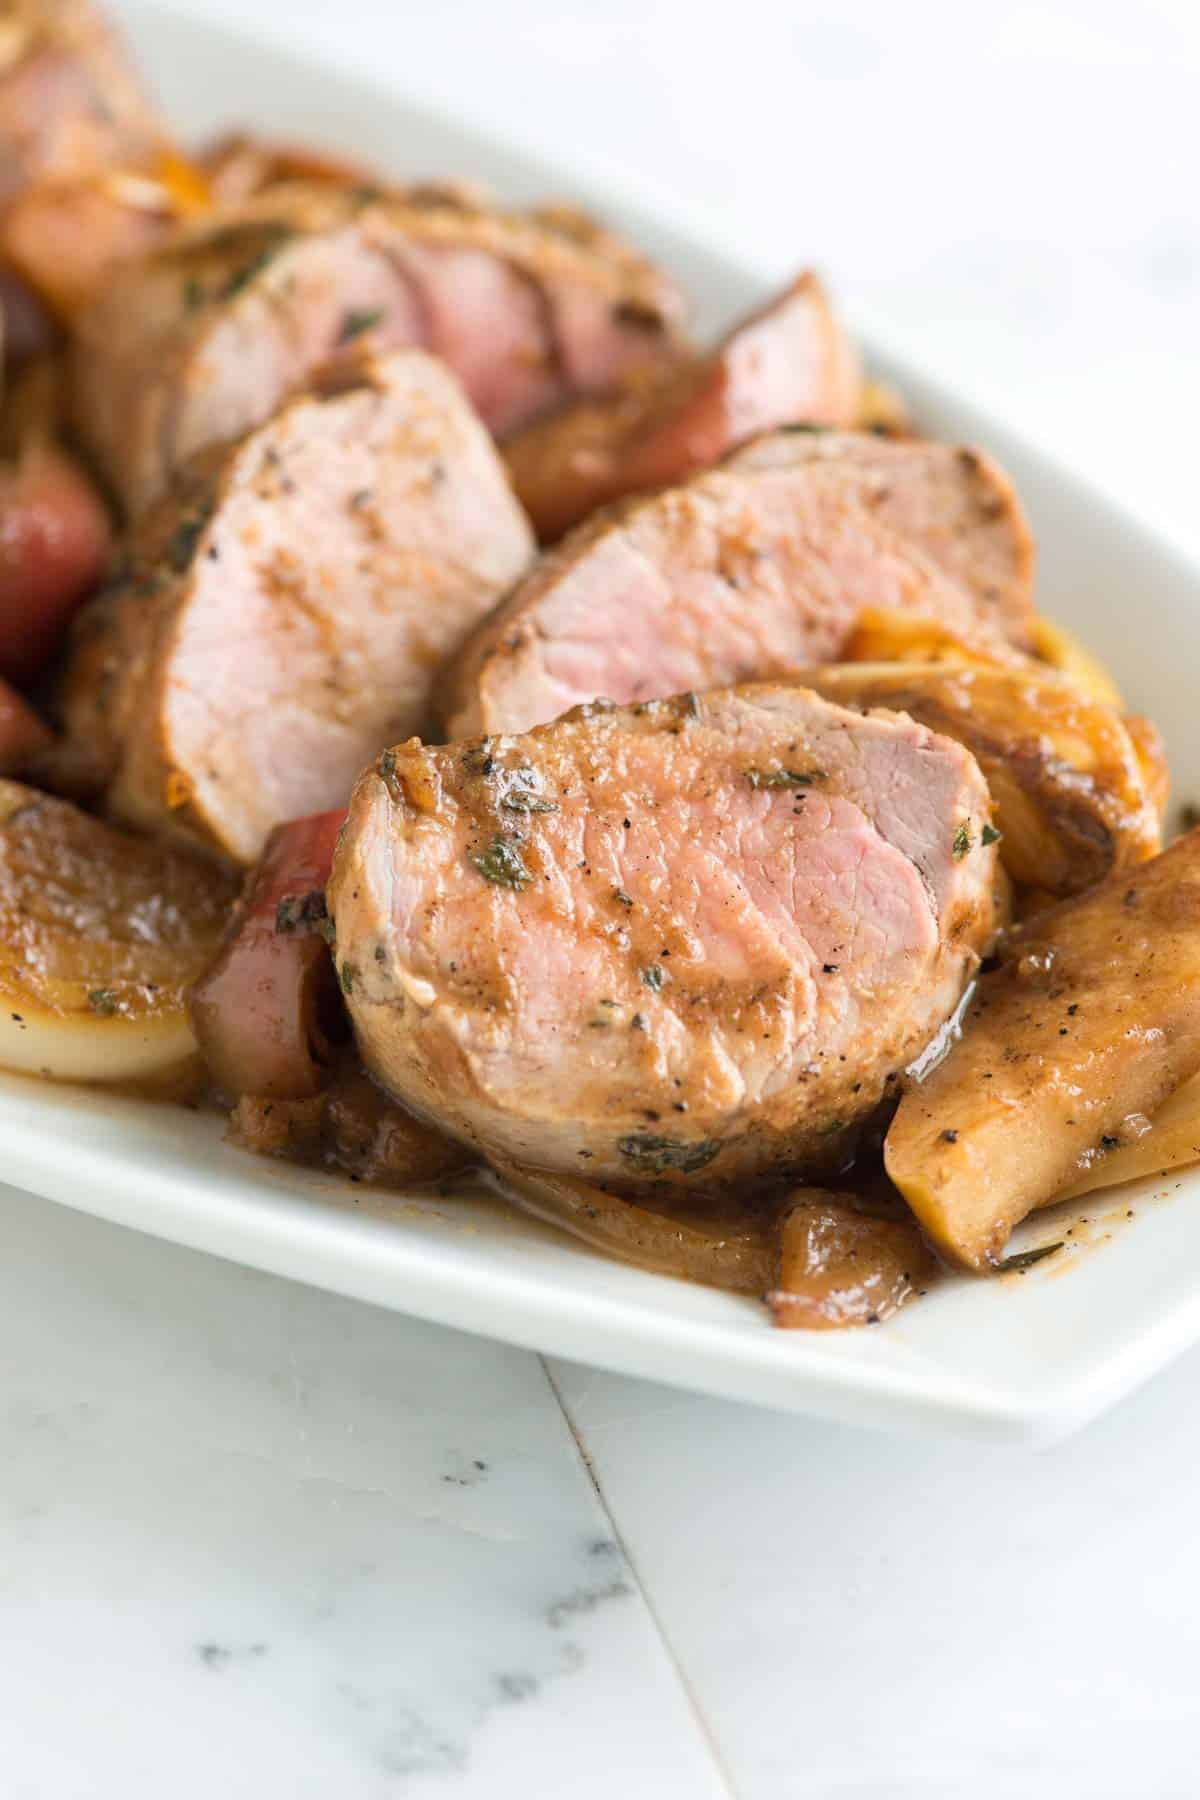 Pork Tenderloin With Apples
 Perfect Roasted Pork Tenderloin Recipe with Apples